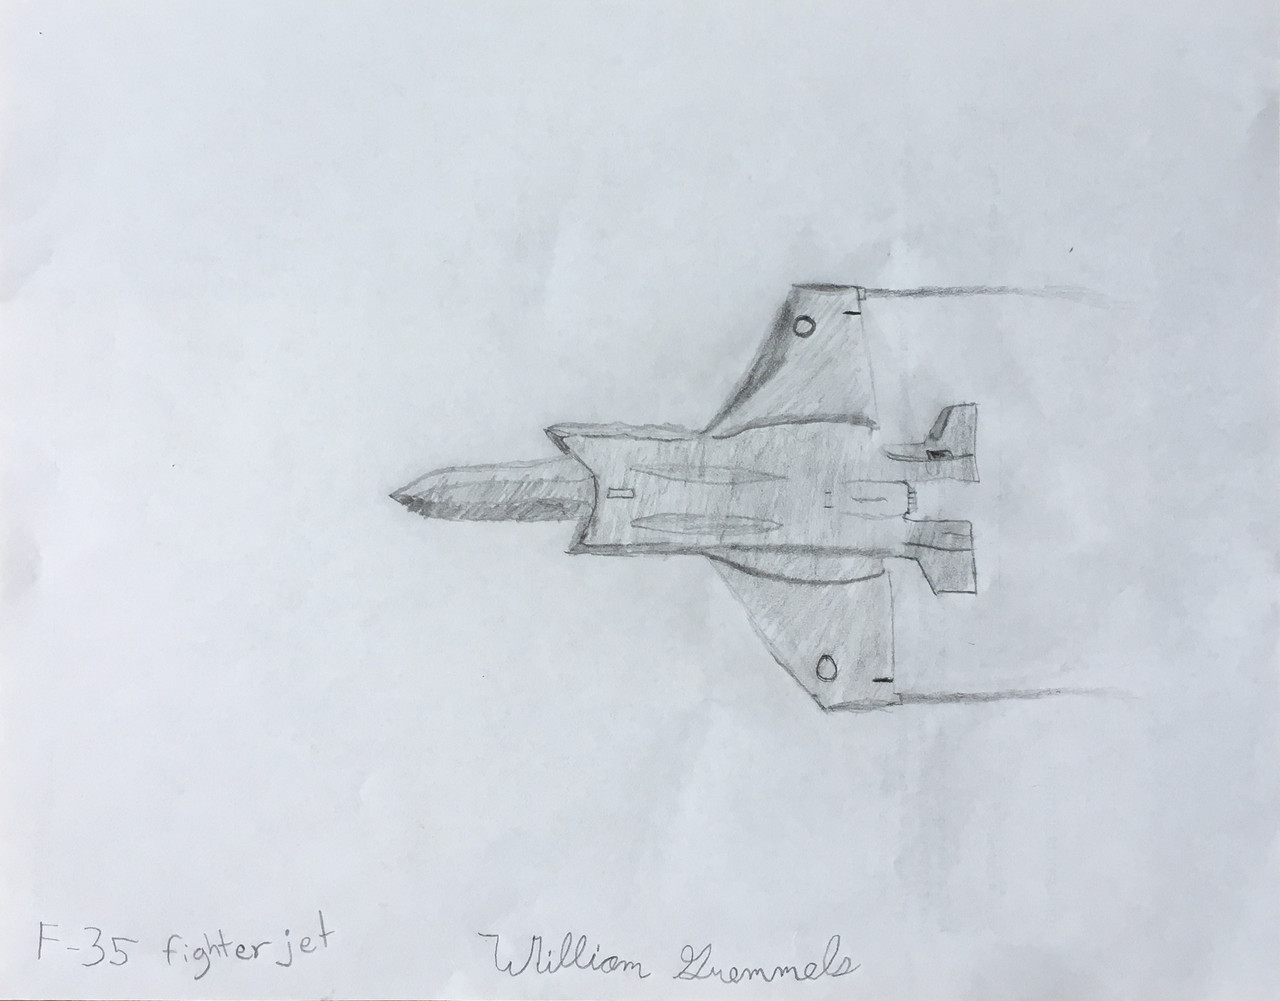 How To Draw A Realistic Jet, Fighter Jet, Step by Step, Drawing Guide, by  JTM93 - DragoArt